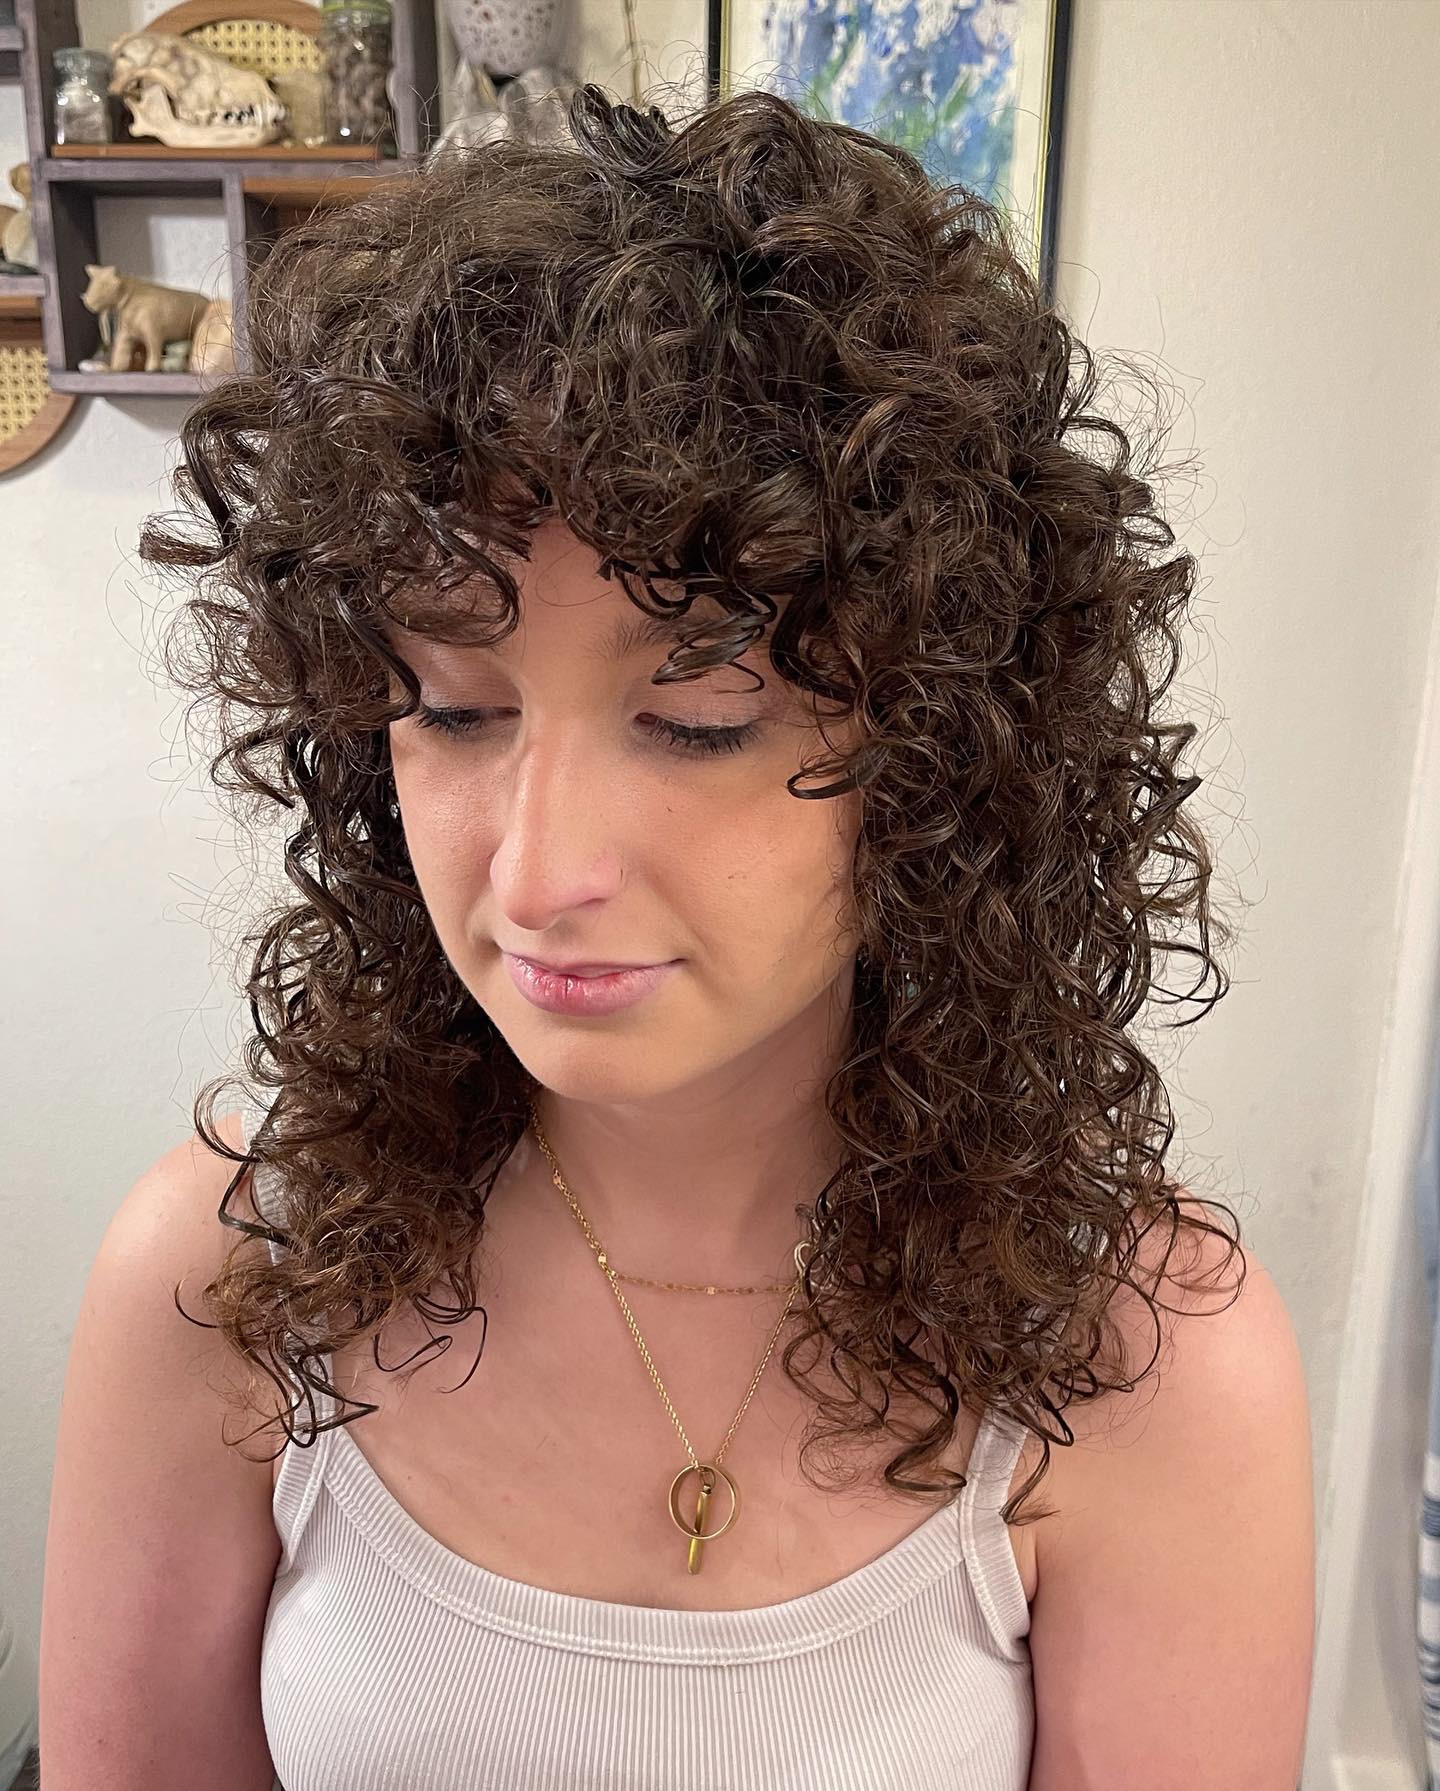 Curly Shag Hairstyle 95 Curly hair shaggy bob | Curly shag mullet | Medium length curly shags Curly Shag Hairstyles for Women